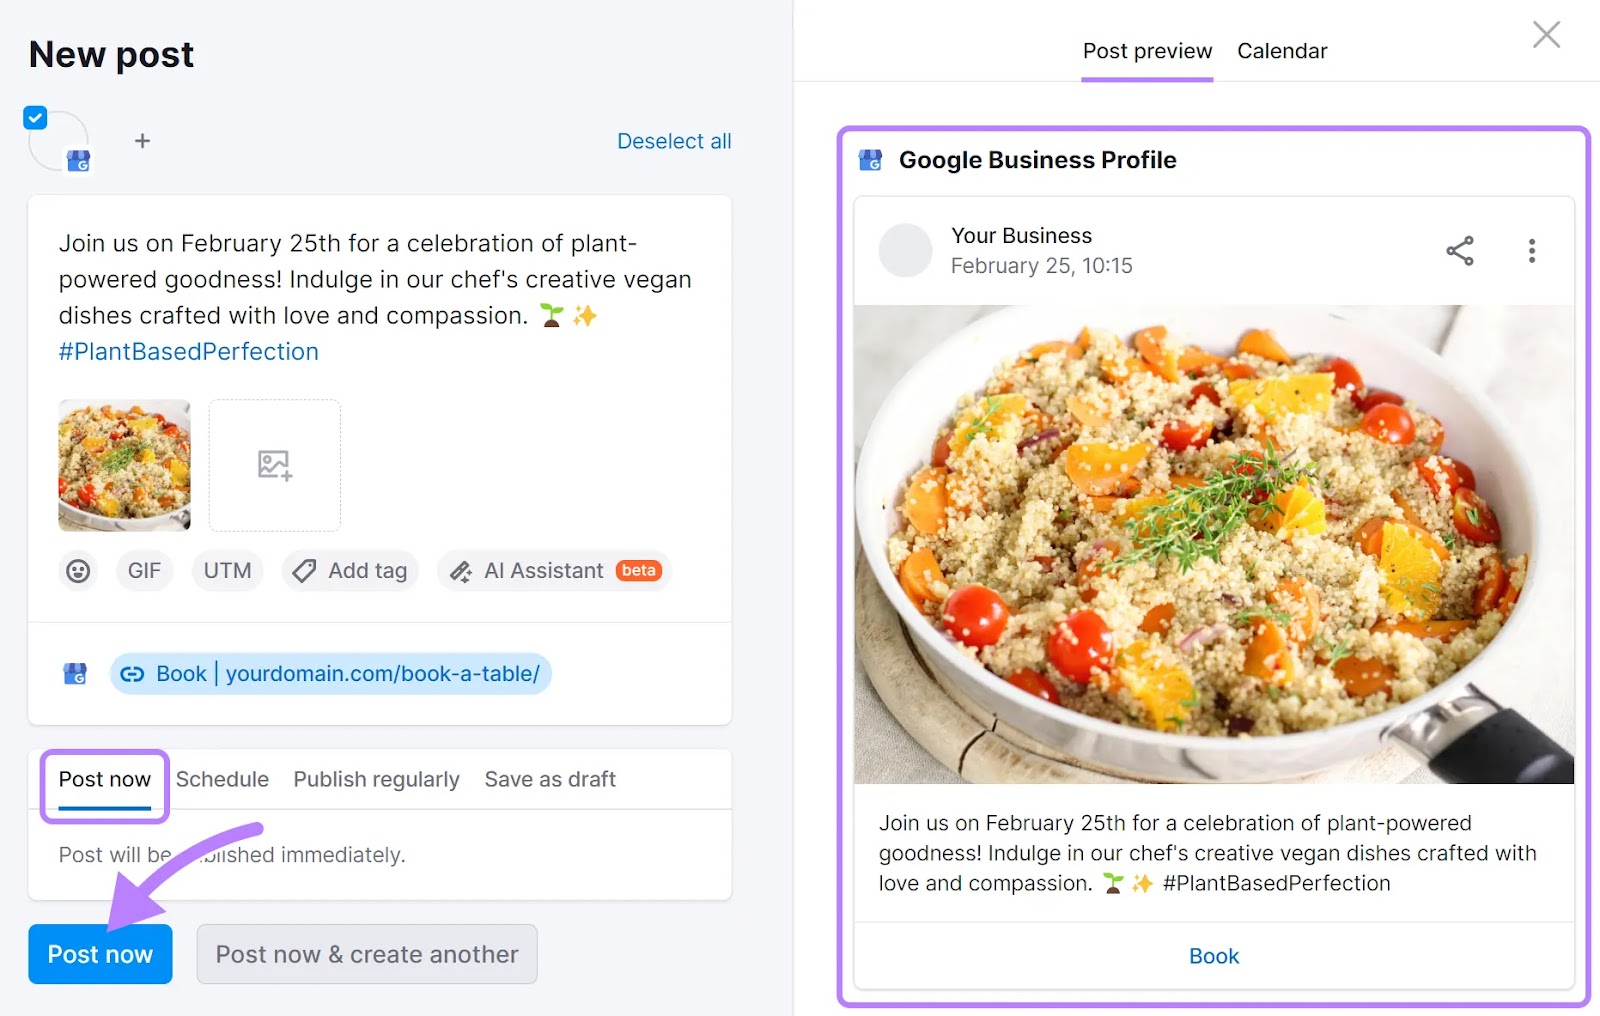 "New post" (left) and "Post preview" (right) windows successful  Social Poster tool